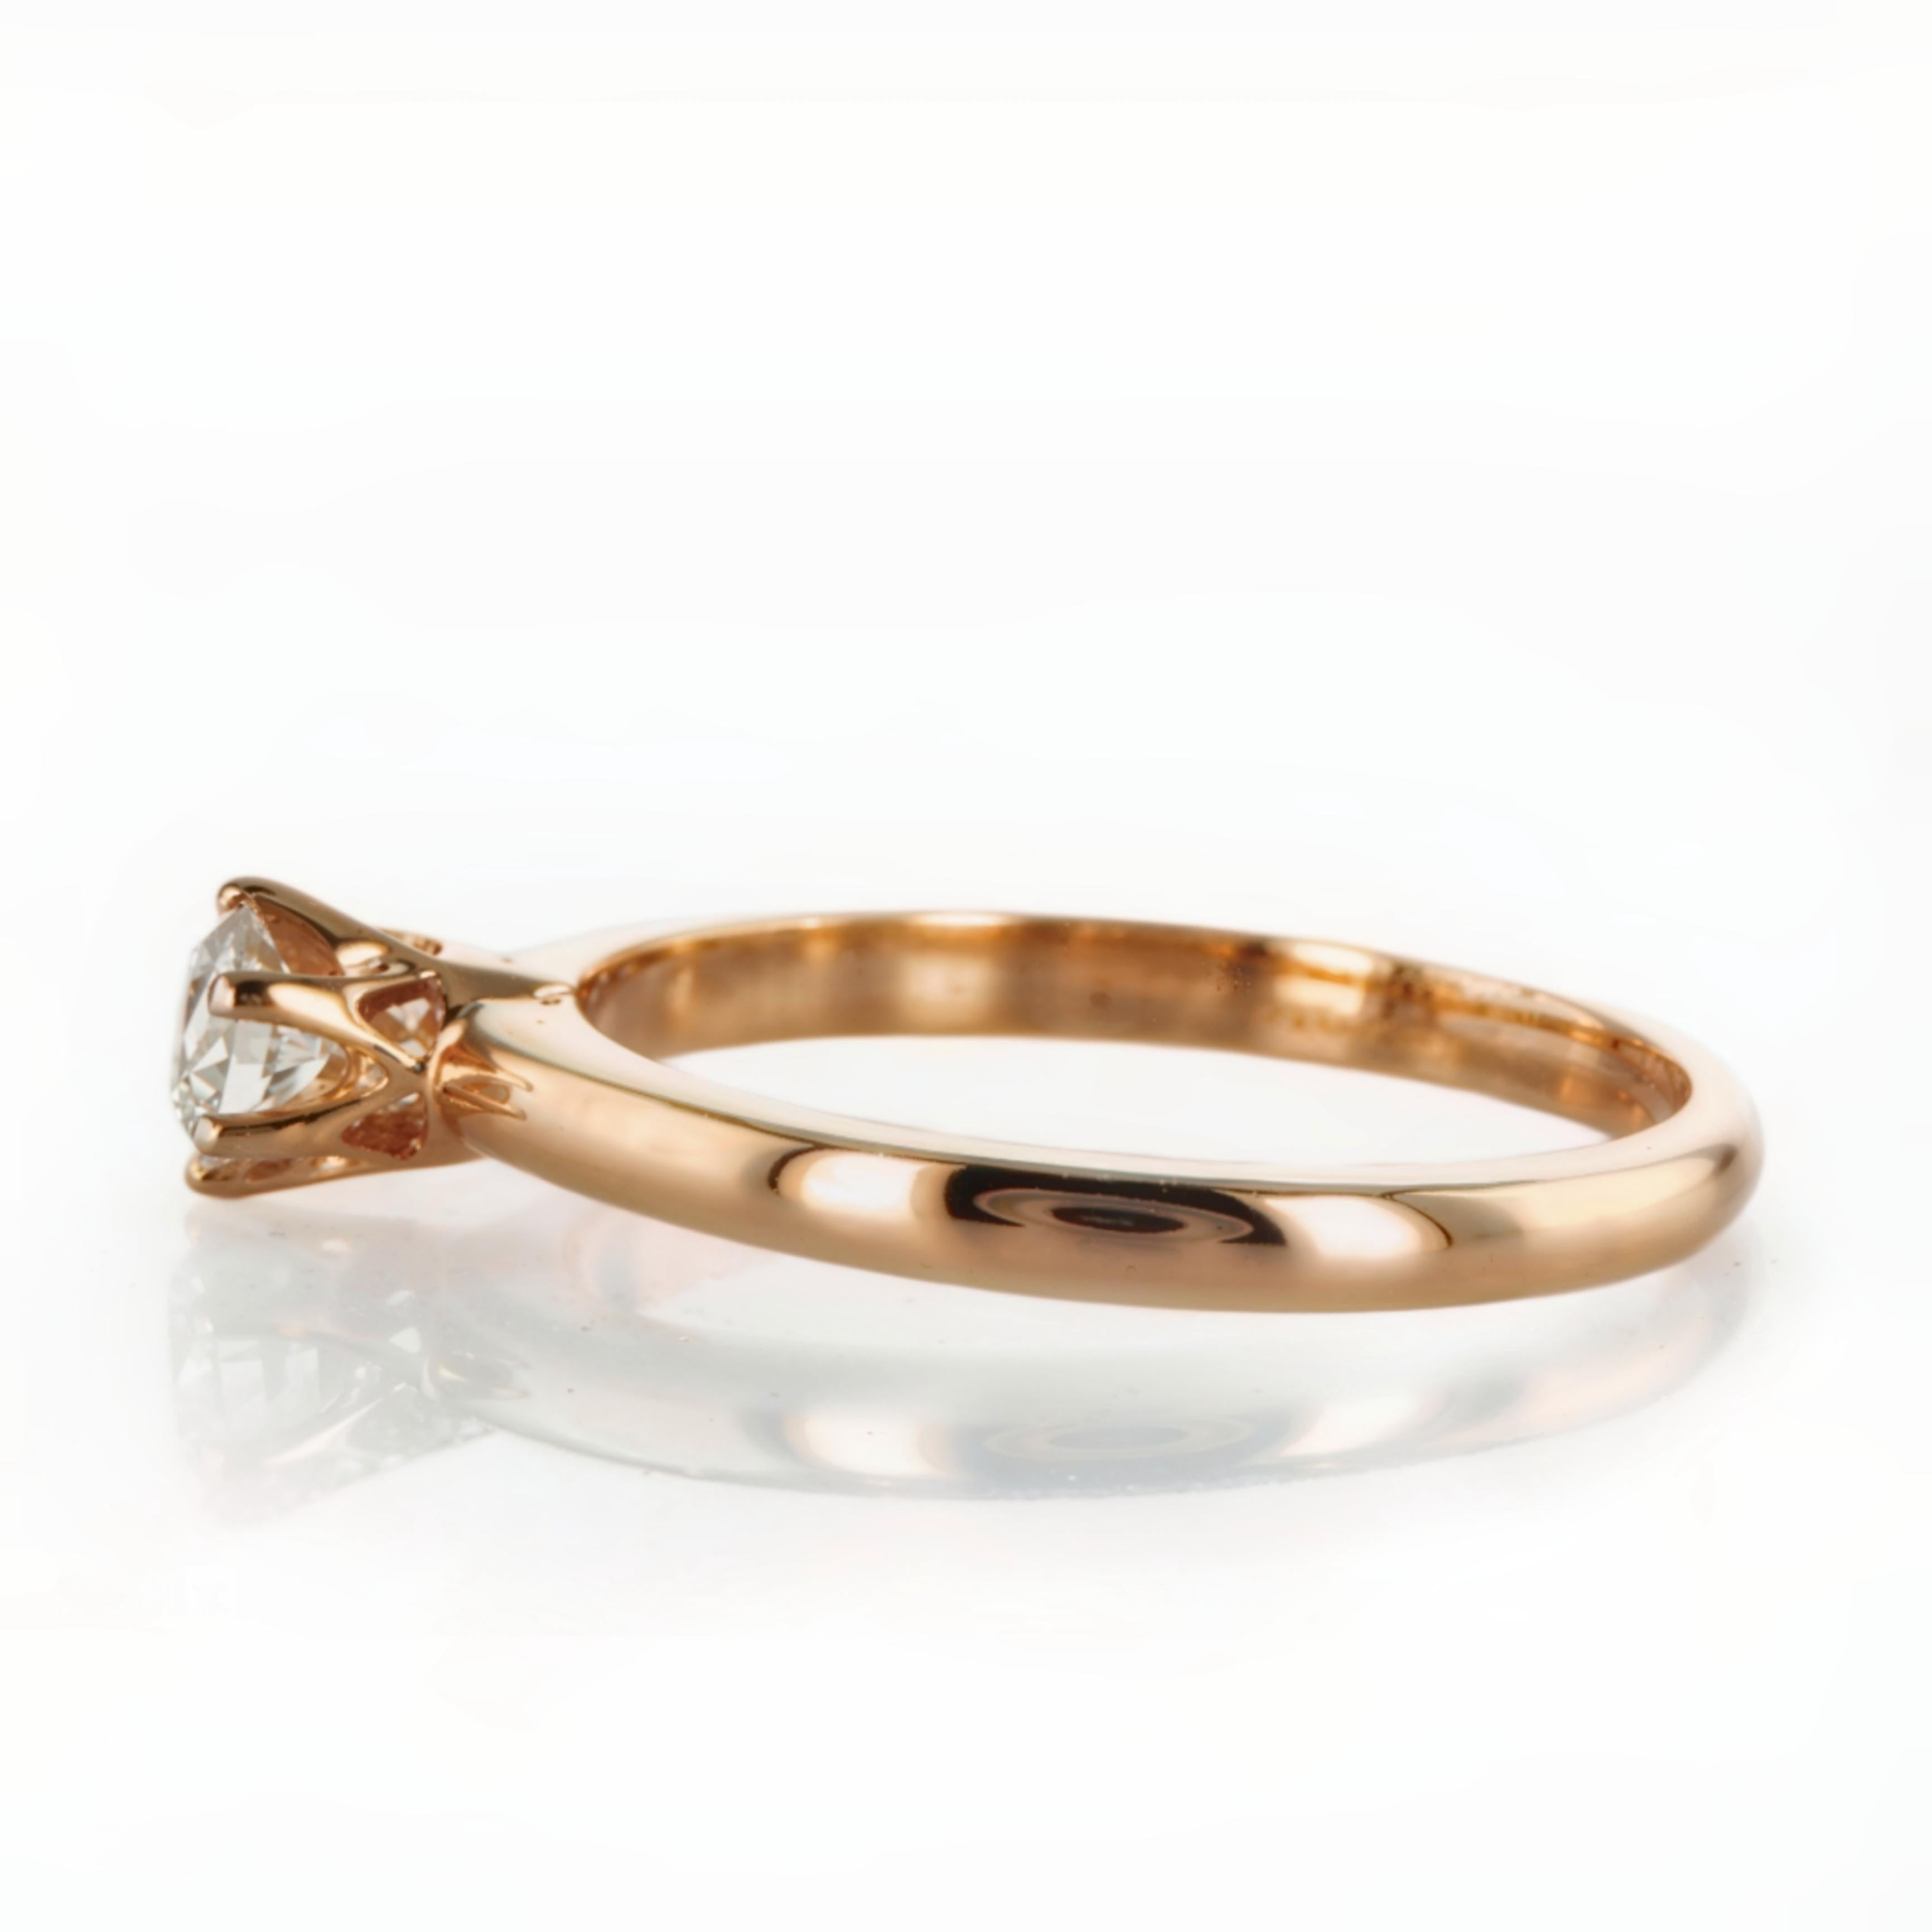 For Sale:  Stunning Classic 0.25 Carat Diamond Solitaire Ring in 14K Gold 7